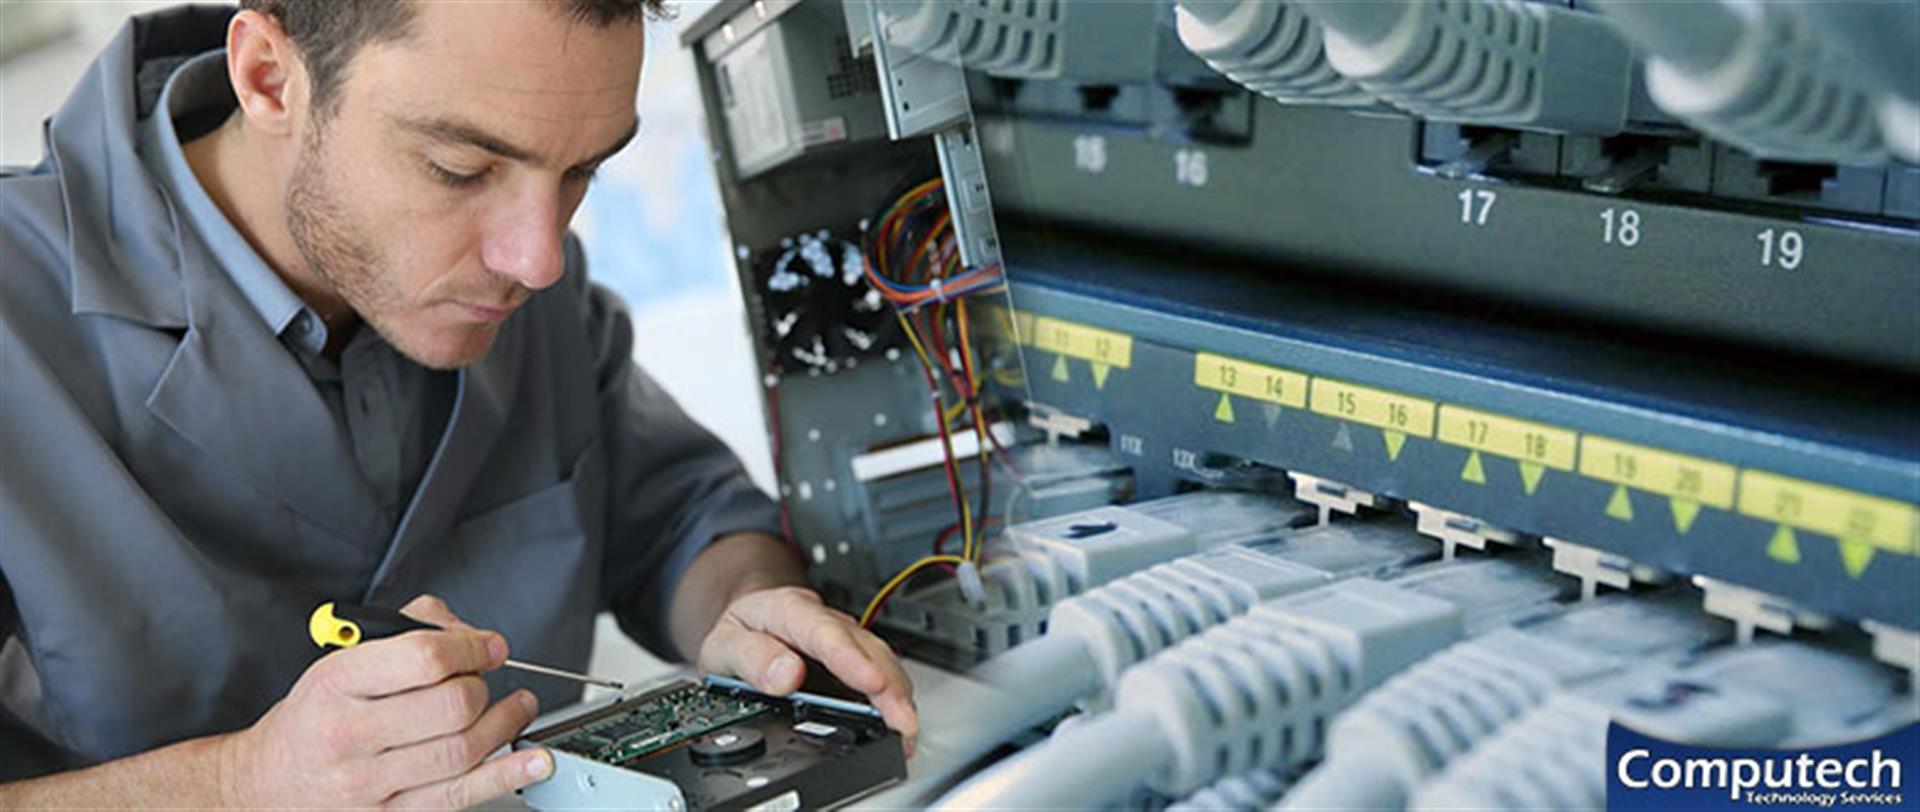 Leesburg Virginia On-Site PC & Printer Repair, Networking, Voice & Data Cabling Services